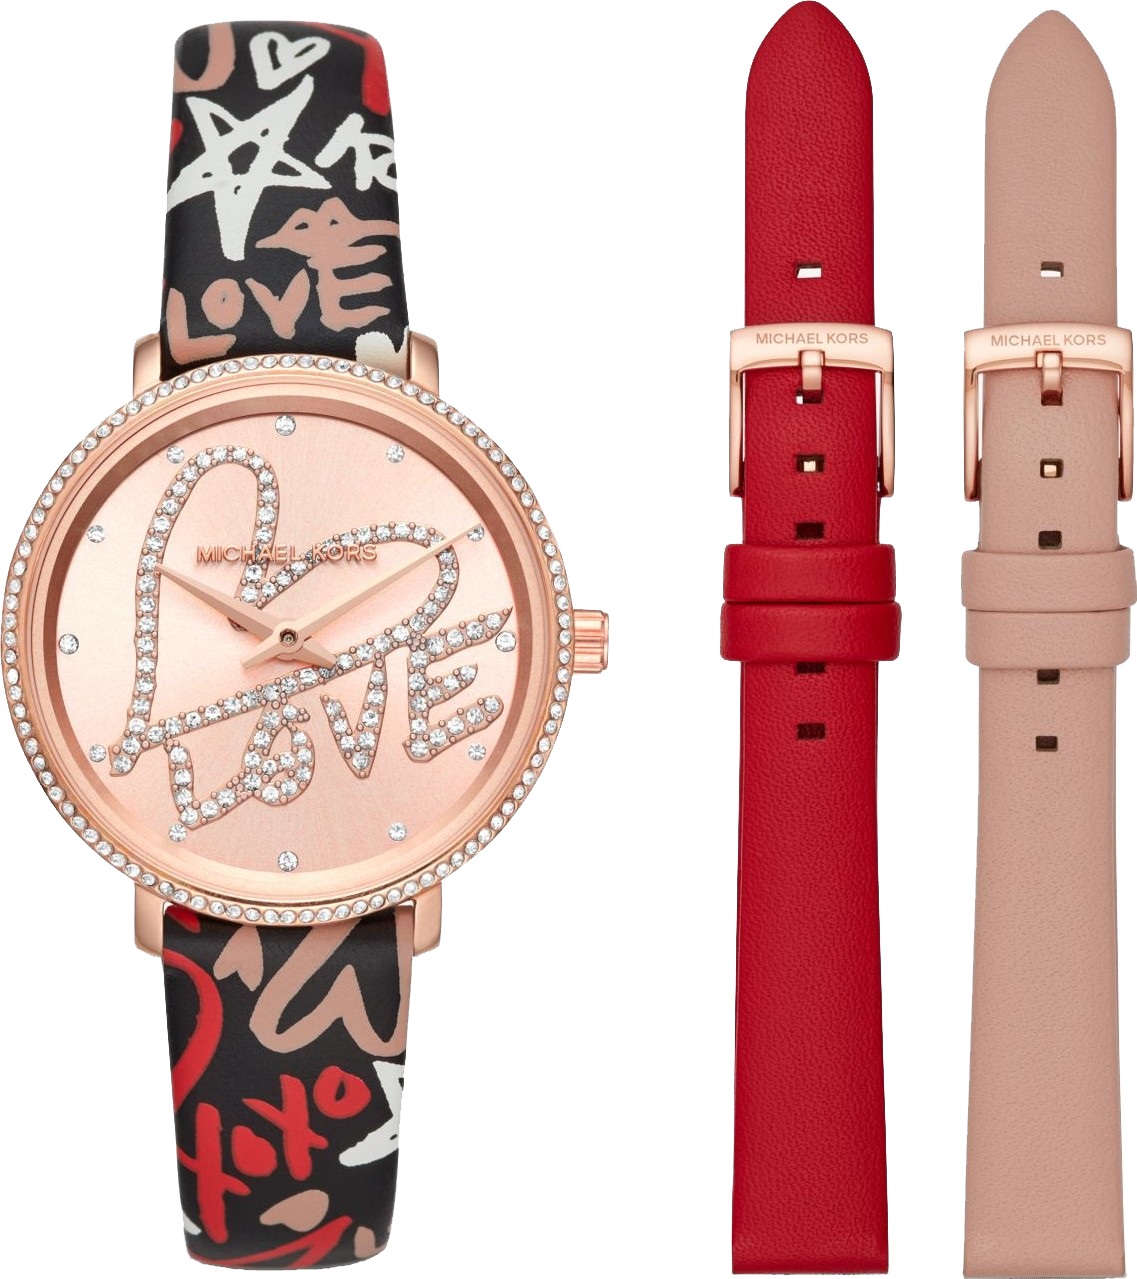 Michael Kors Rose Gold watch with rose gold bracelet with diamonds  Watches  women michael kors Handbags michael kors Womens michael kors watch